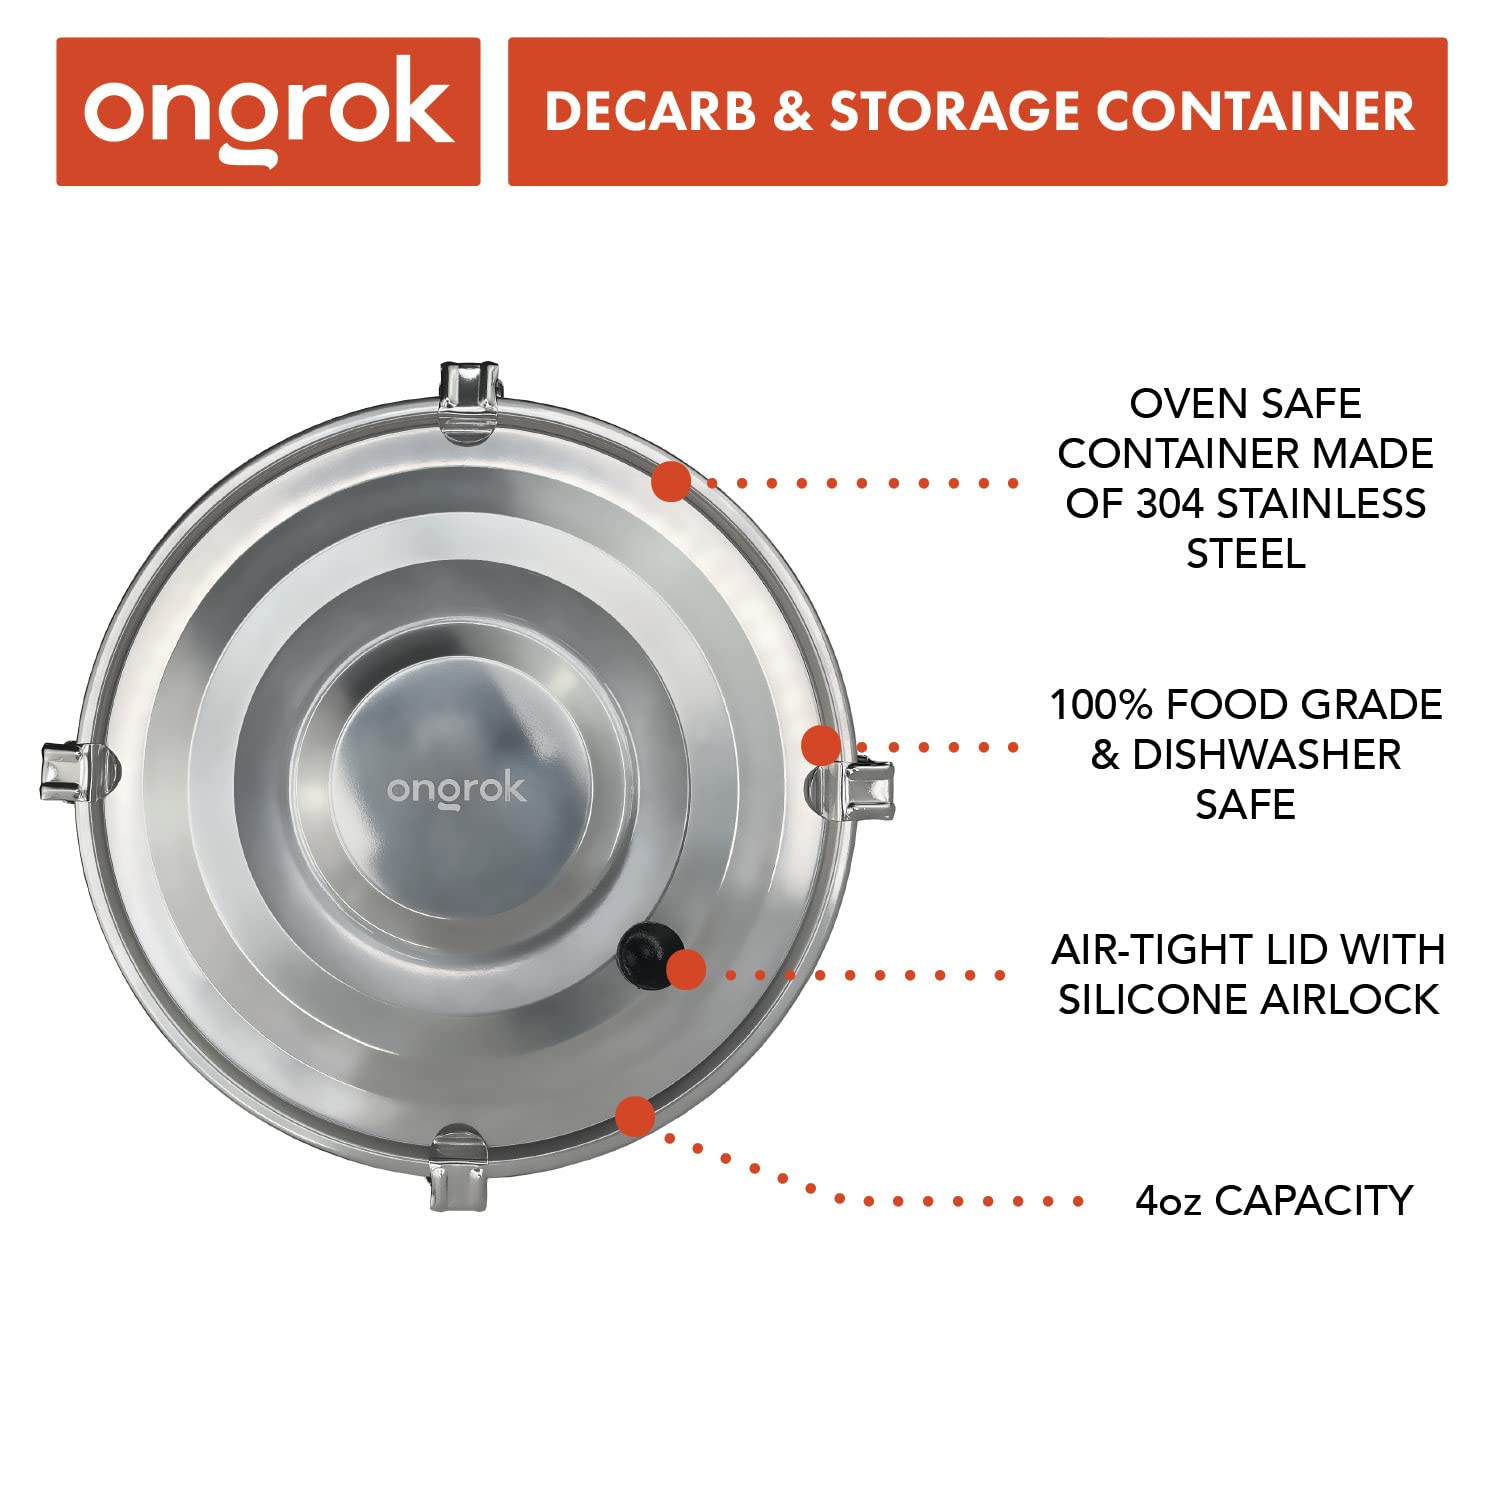 Decarboxylator Box by ONGROK, Stainless Steel, Airtight, Food Grade, Full Manual Decarb Kit with Infusion Accessories, Dishwasher & Oven Safe